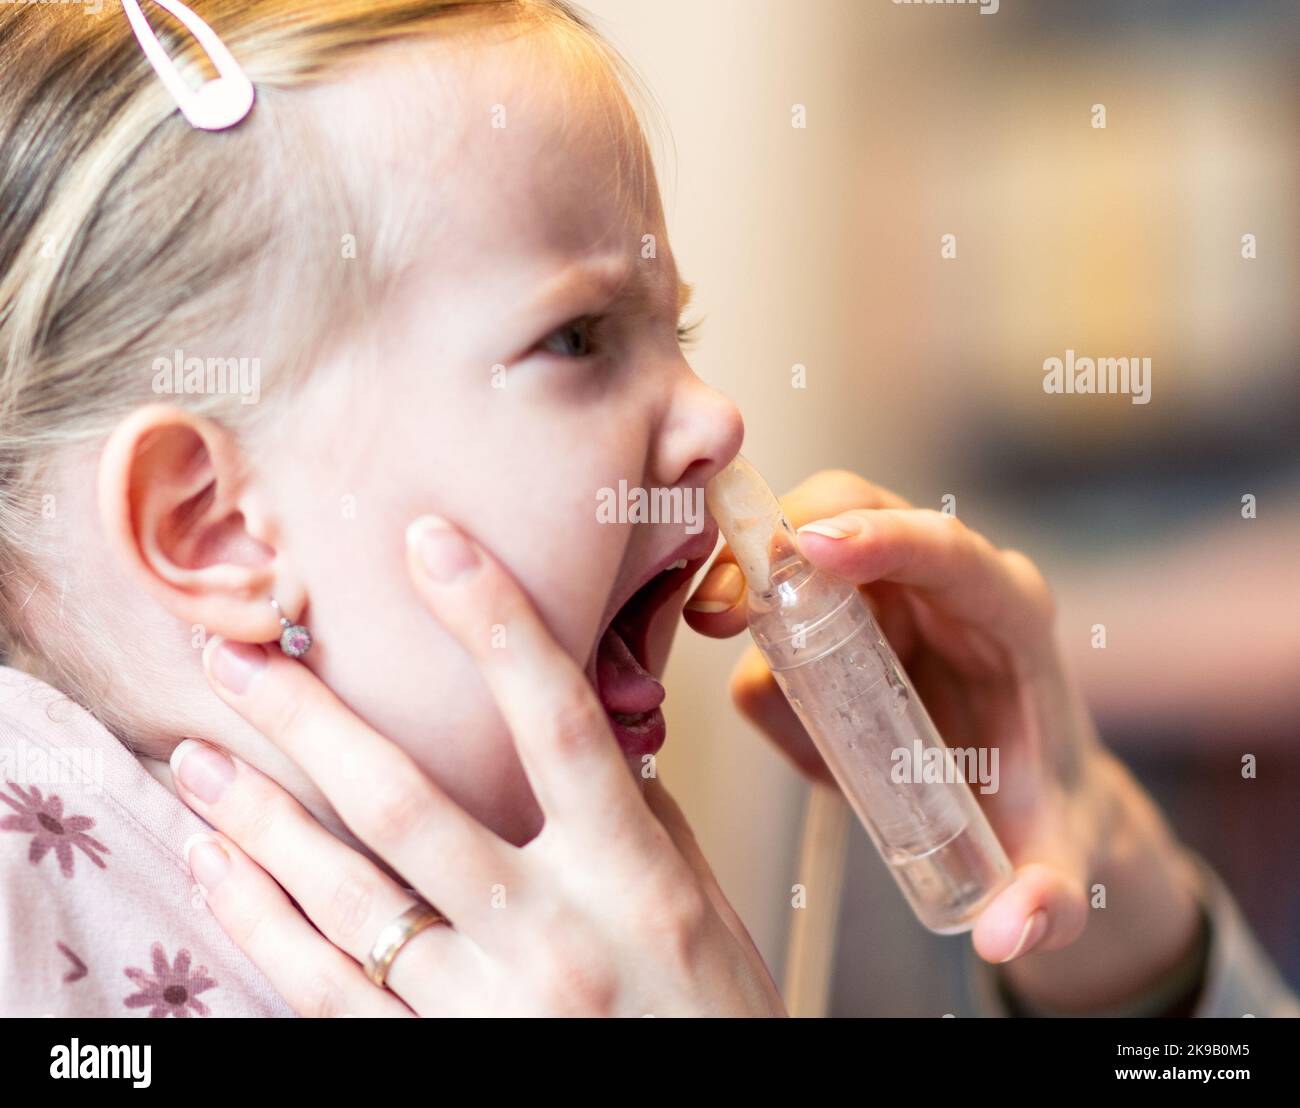 https://c8.alamy.com/comp/2K9B0M5/mother-cleaning-baby-nose-nasal-aspiration-connected-to-vaccum-cleaner-2K9B0M5.jpg